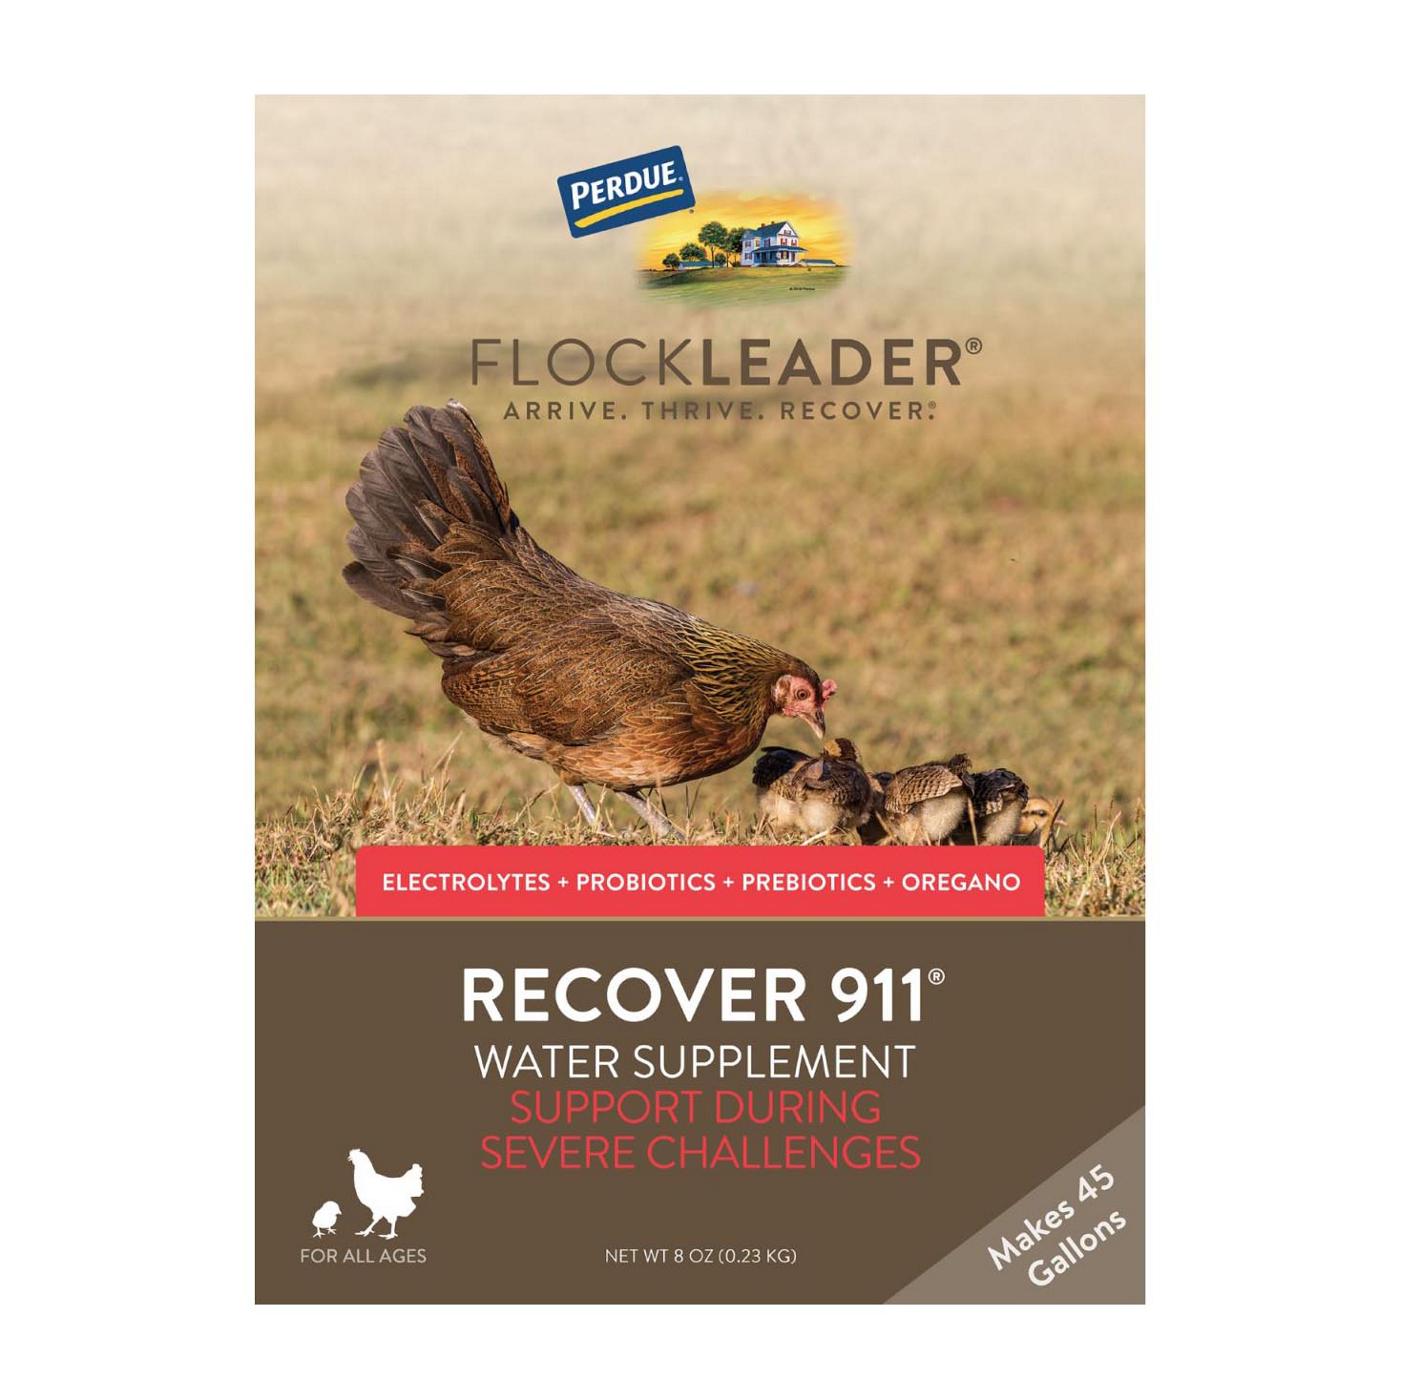 Flockleader Recover 911 Water Supplement; image 1 of 4